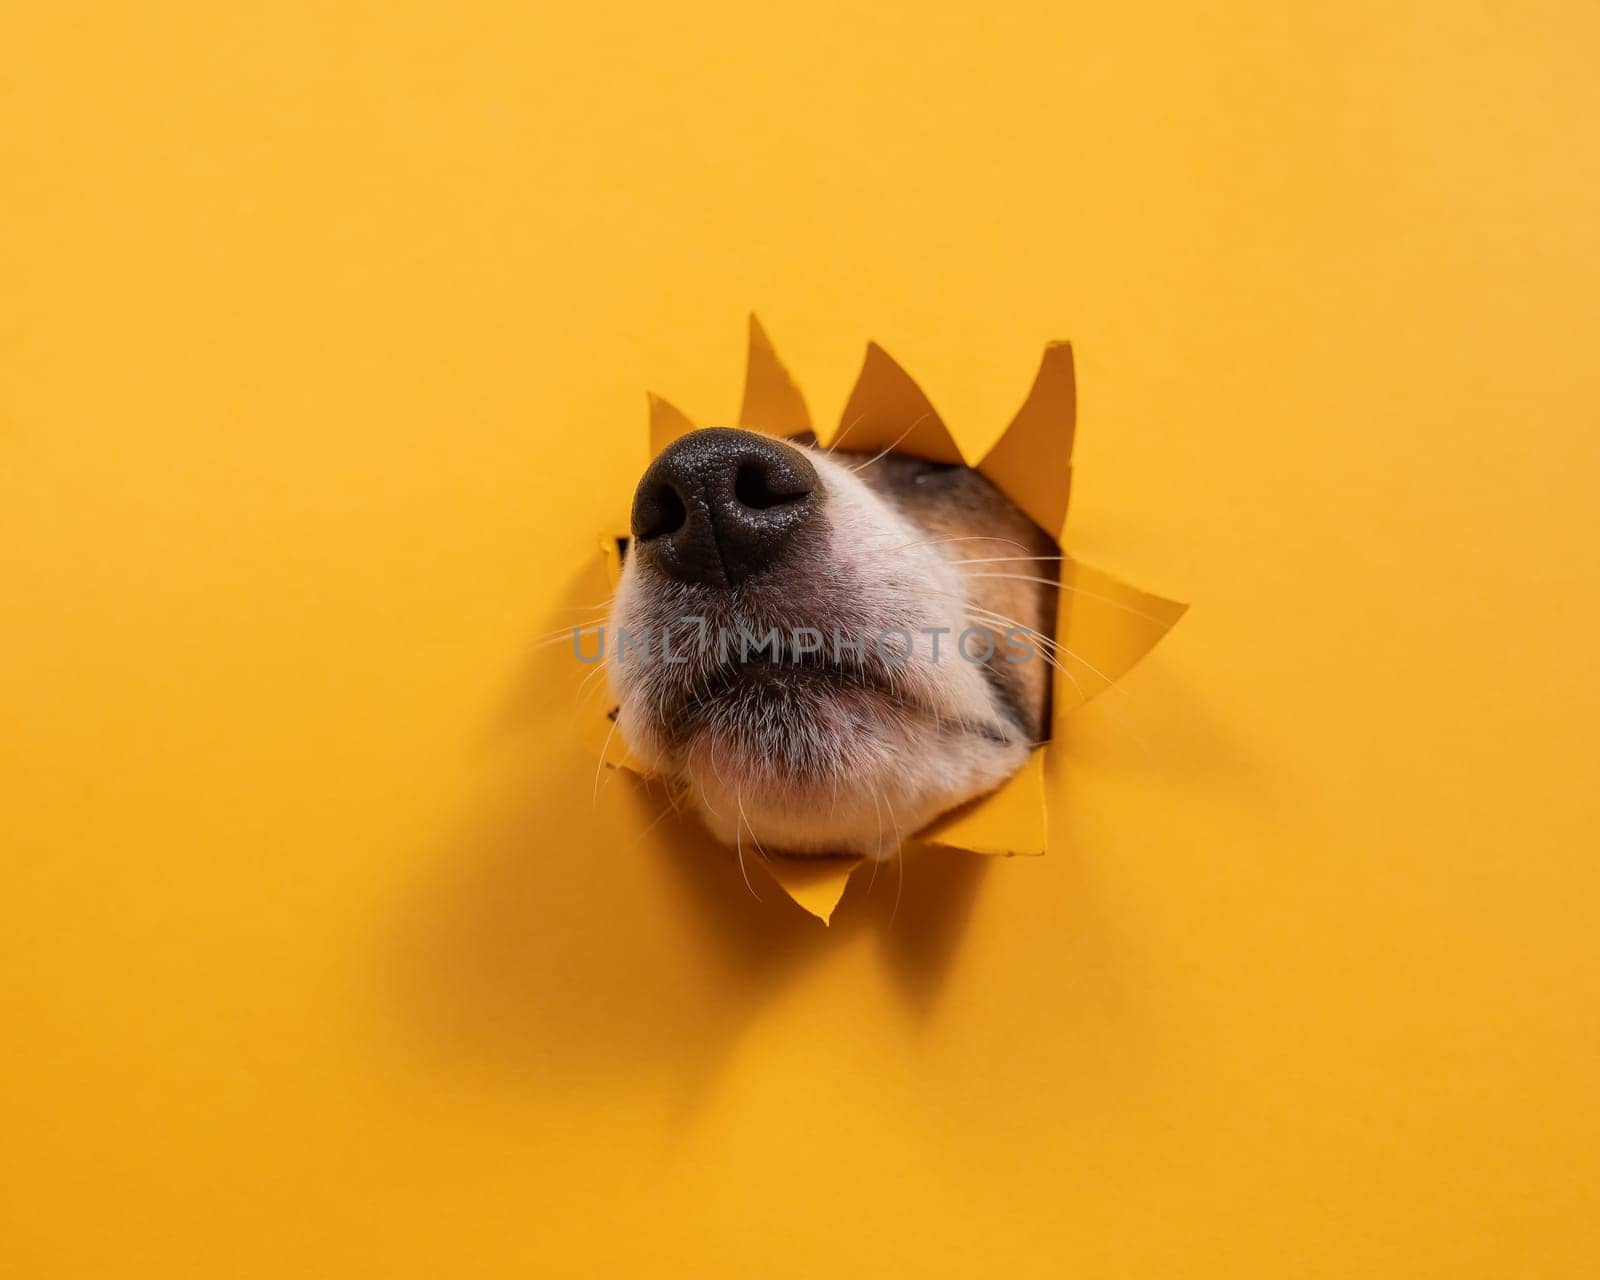 Jack Russell Terrier dog nose sticking out of torn paper orange background. by mrwed54